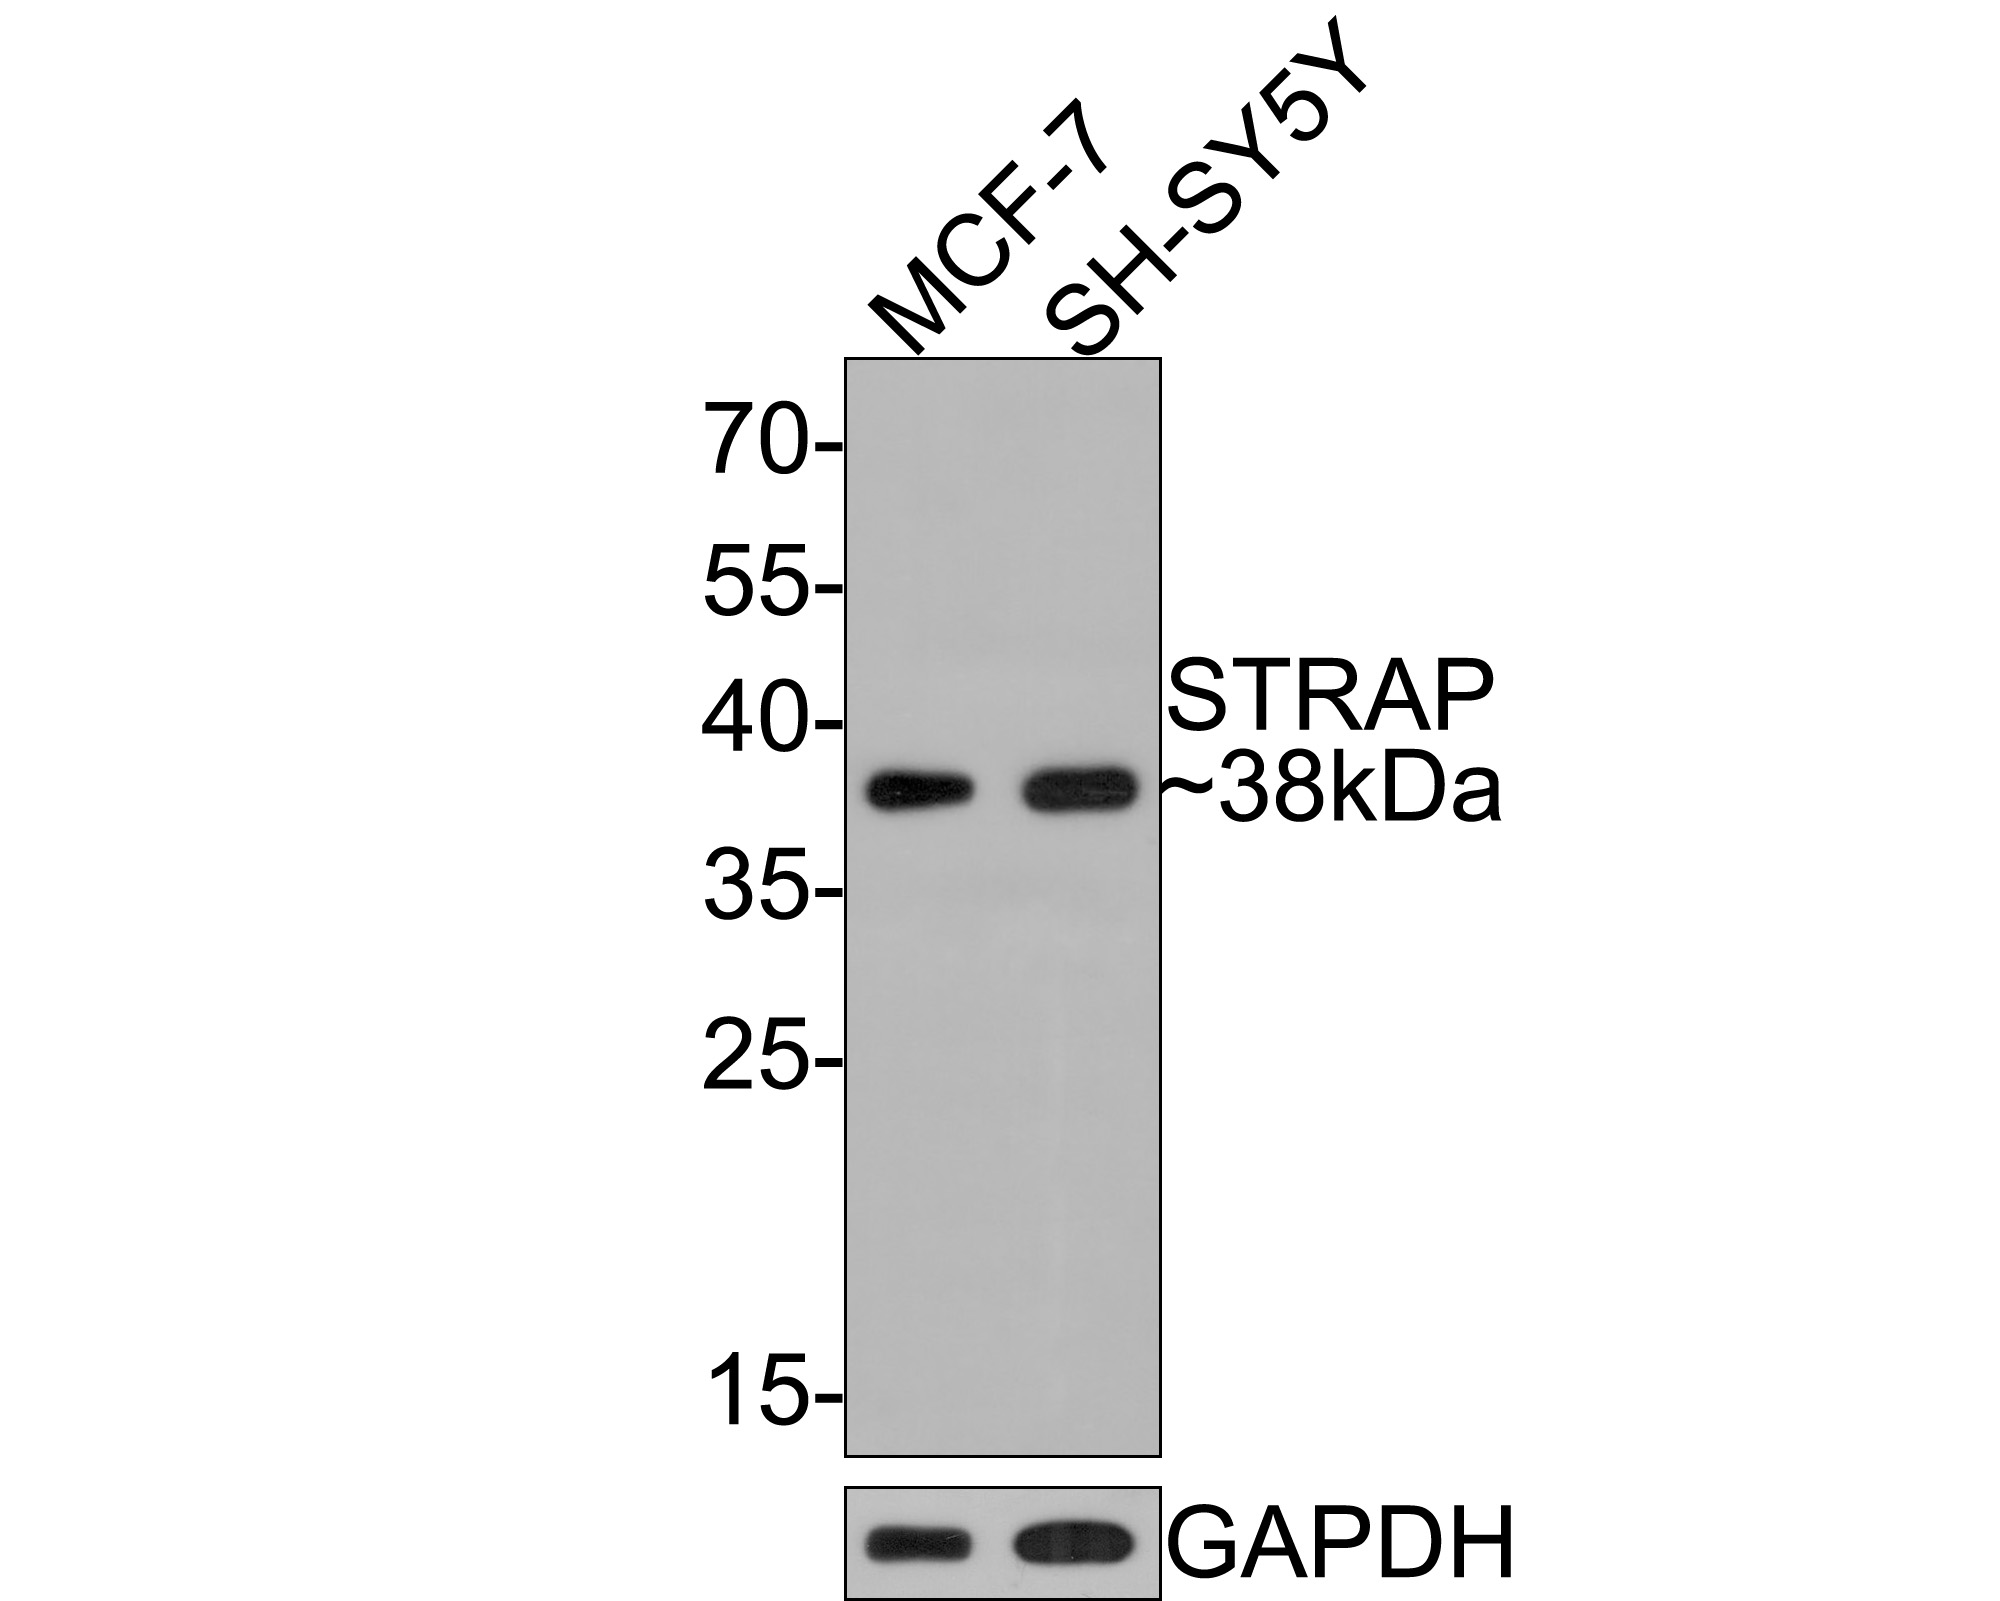 Western blot analysis of STRAP on different lysates with Mouse anti-STRAP antibody (HA601007) at 1/500 dilution.<br />
<br />
Lane 1: MCF-7 cell lysate<br />
Lane 2: SH-SY5Y cell lysate<br />
<br />
Lysates/proteins at 10 µg/Lane.<br />
<br />
Predicted band size: 38 kDa<br />
Observed band size: 38 kDa<br />
<br />
Exposure time: 1 minute;<br />
<br />
12% SDS-PAGE gel.<br />
<br />
Proteins were transferred to a PVDF membrane and blocked with 5% NFDM/TBST for 1 hour at room temperature. The primary antibody (HA601007) at 1/500 dilution was used in 5% NFDM/TBST at room temperature for 2 hours. Goat Anti-Mouse IgG - HRP Secondary Antibody (HA1006) at 1:100,000 dilution was used for 1 hour at room temperature.